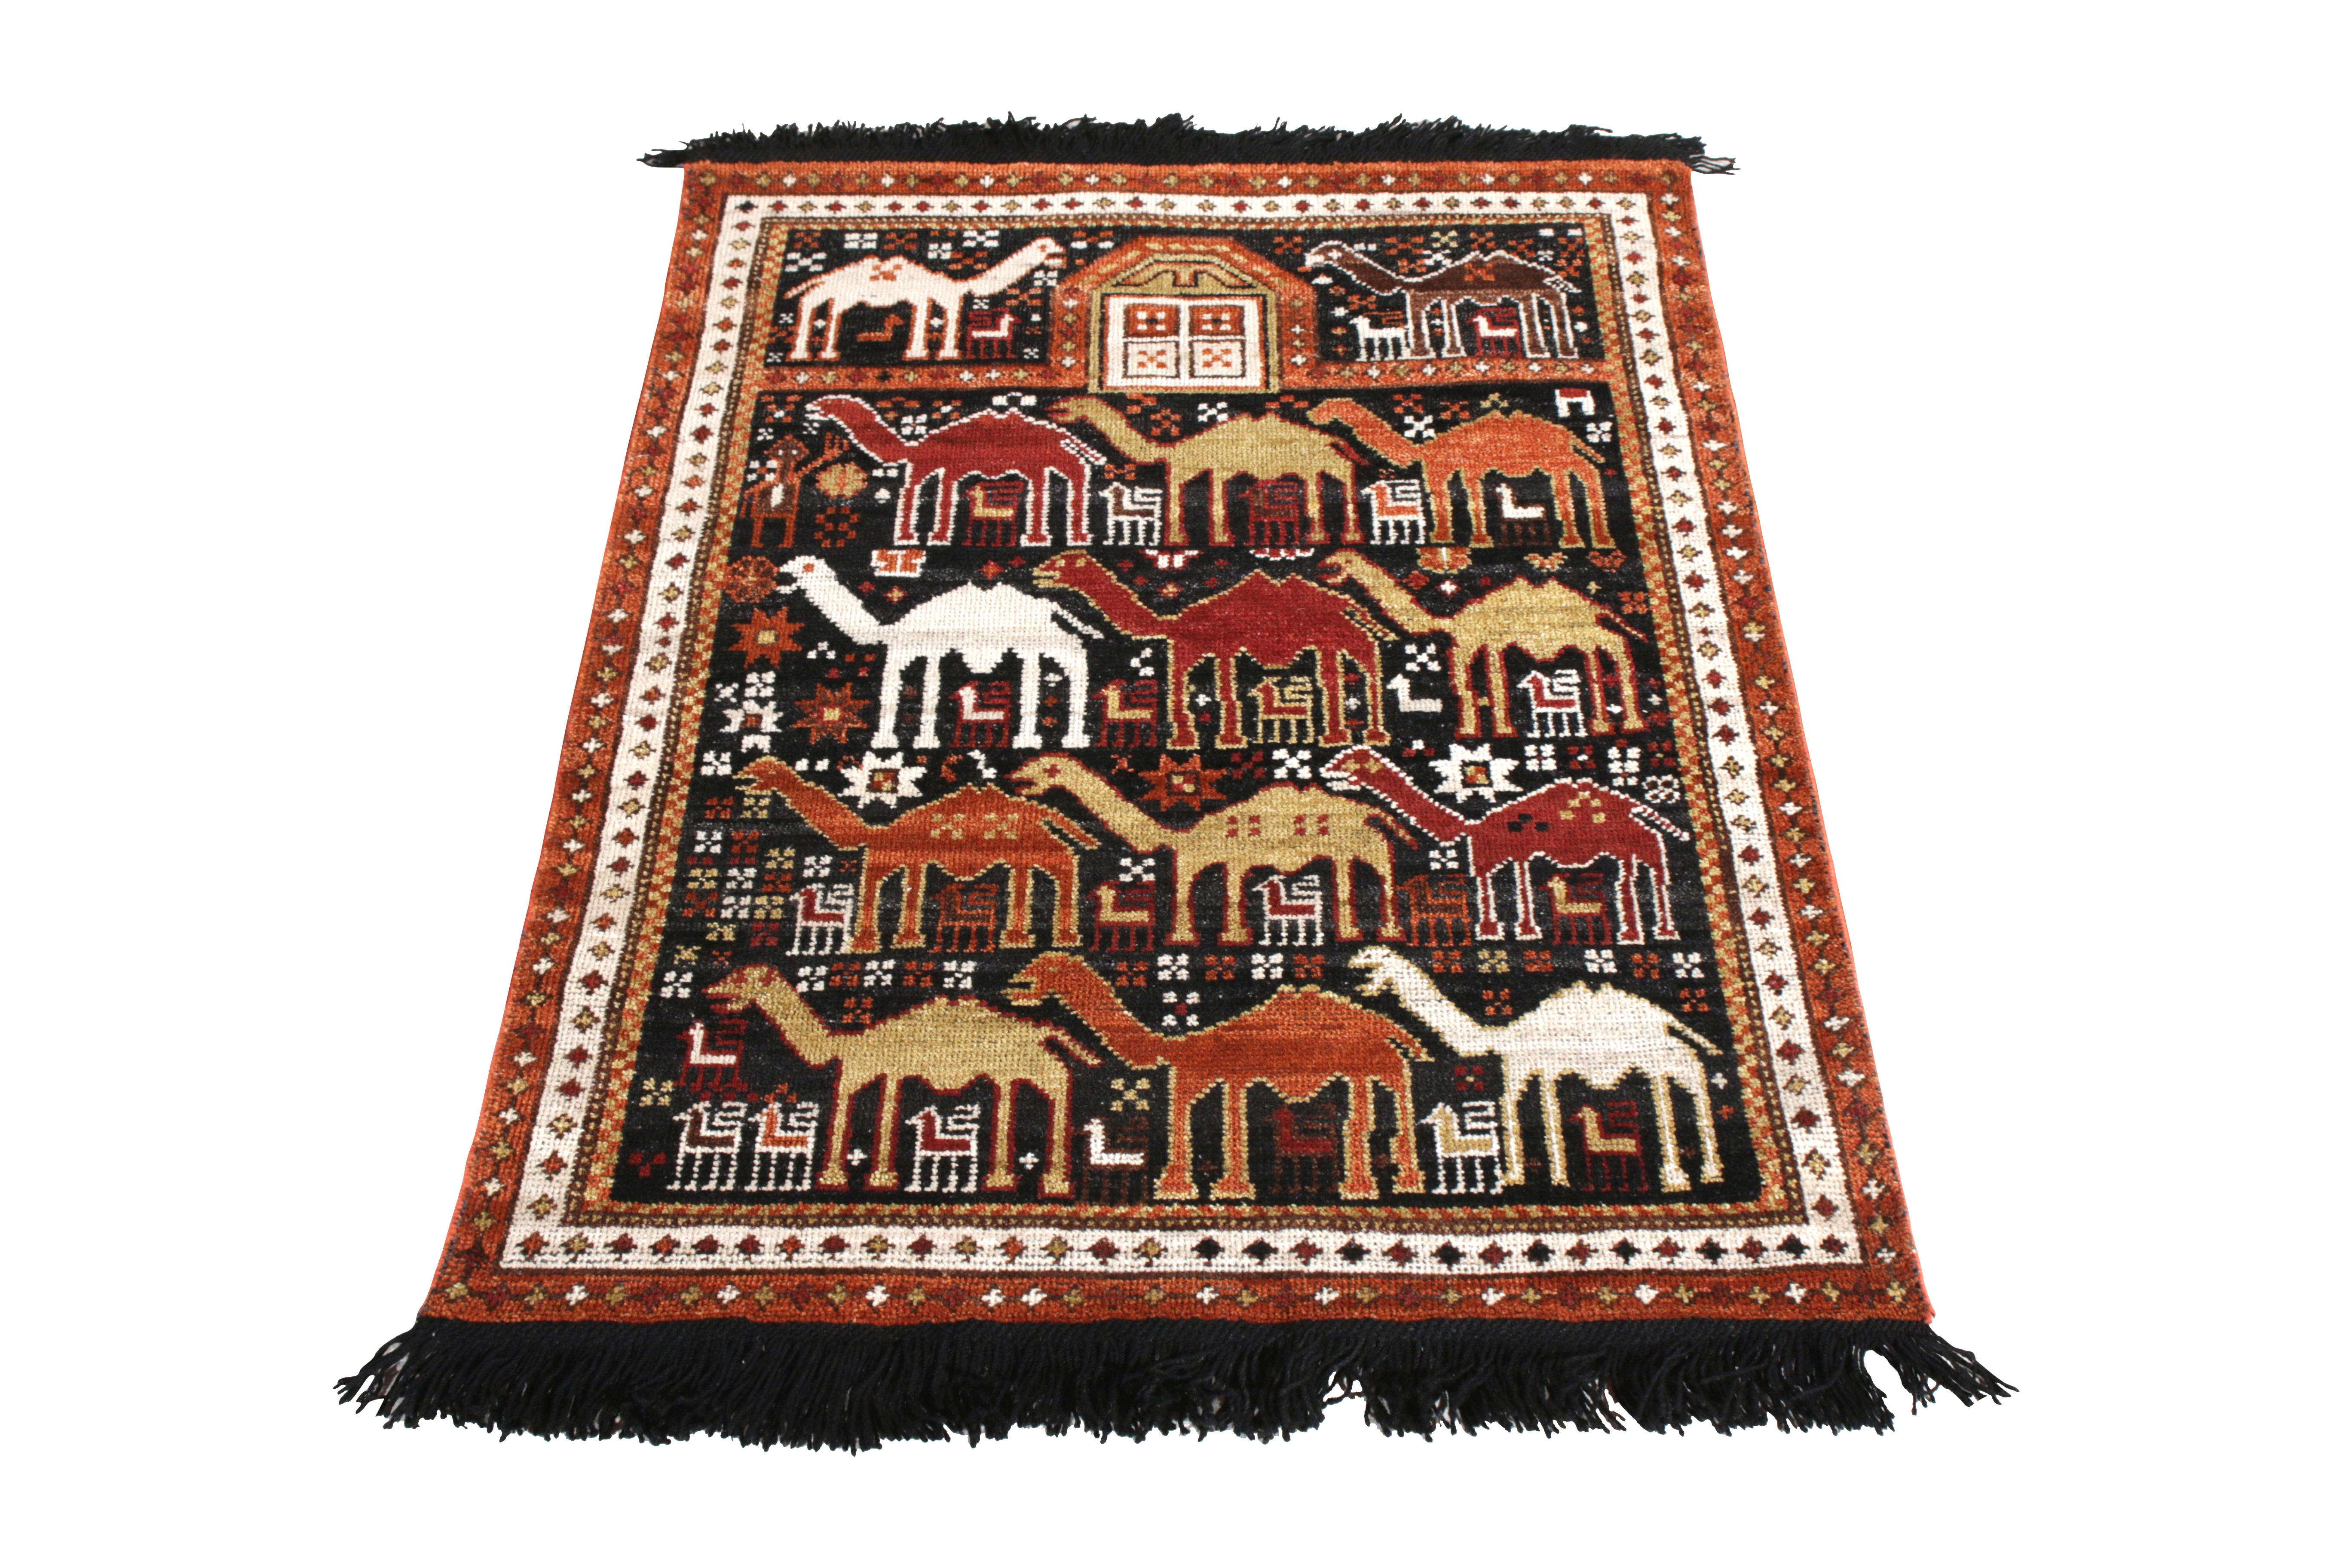 A custom rug design from the Burano Collection by Rug & Kilim, recapturing Classic inspirations like that of this array of Eastern camel motifs believed to symbolize themes of endurance and blessings, a cultural theme as rich as this array of warm